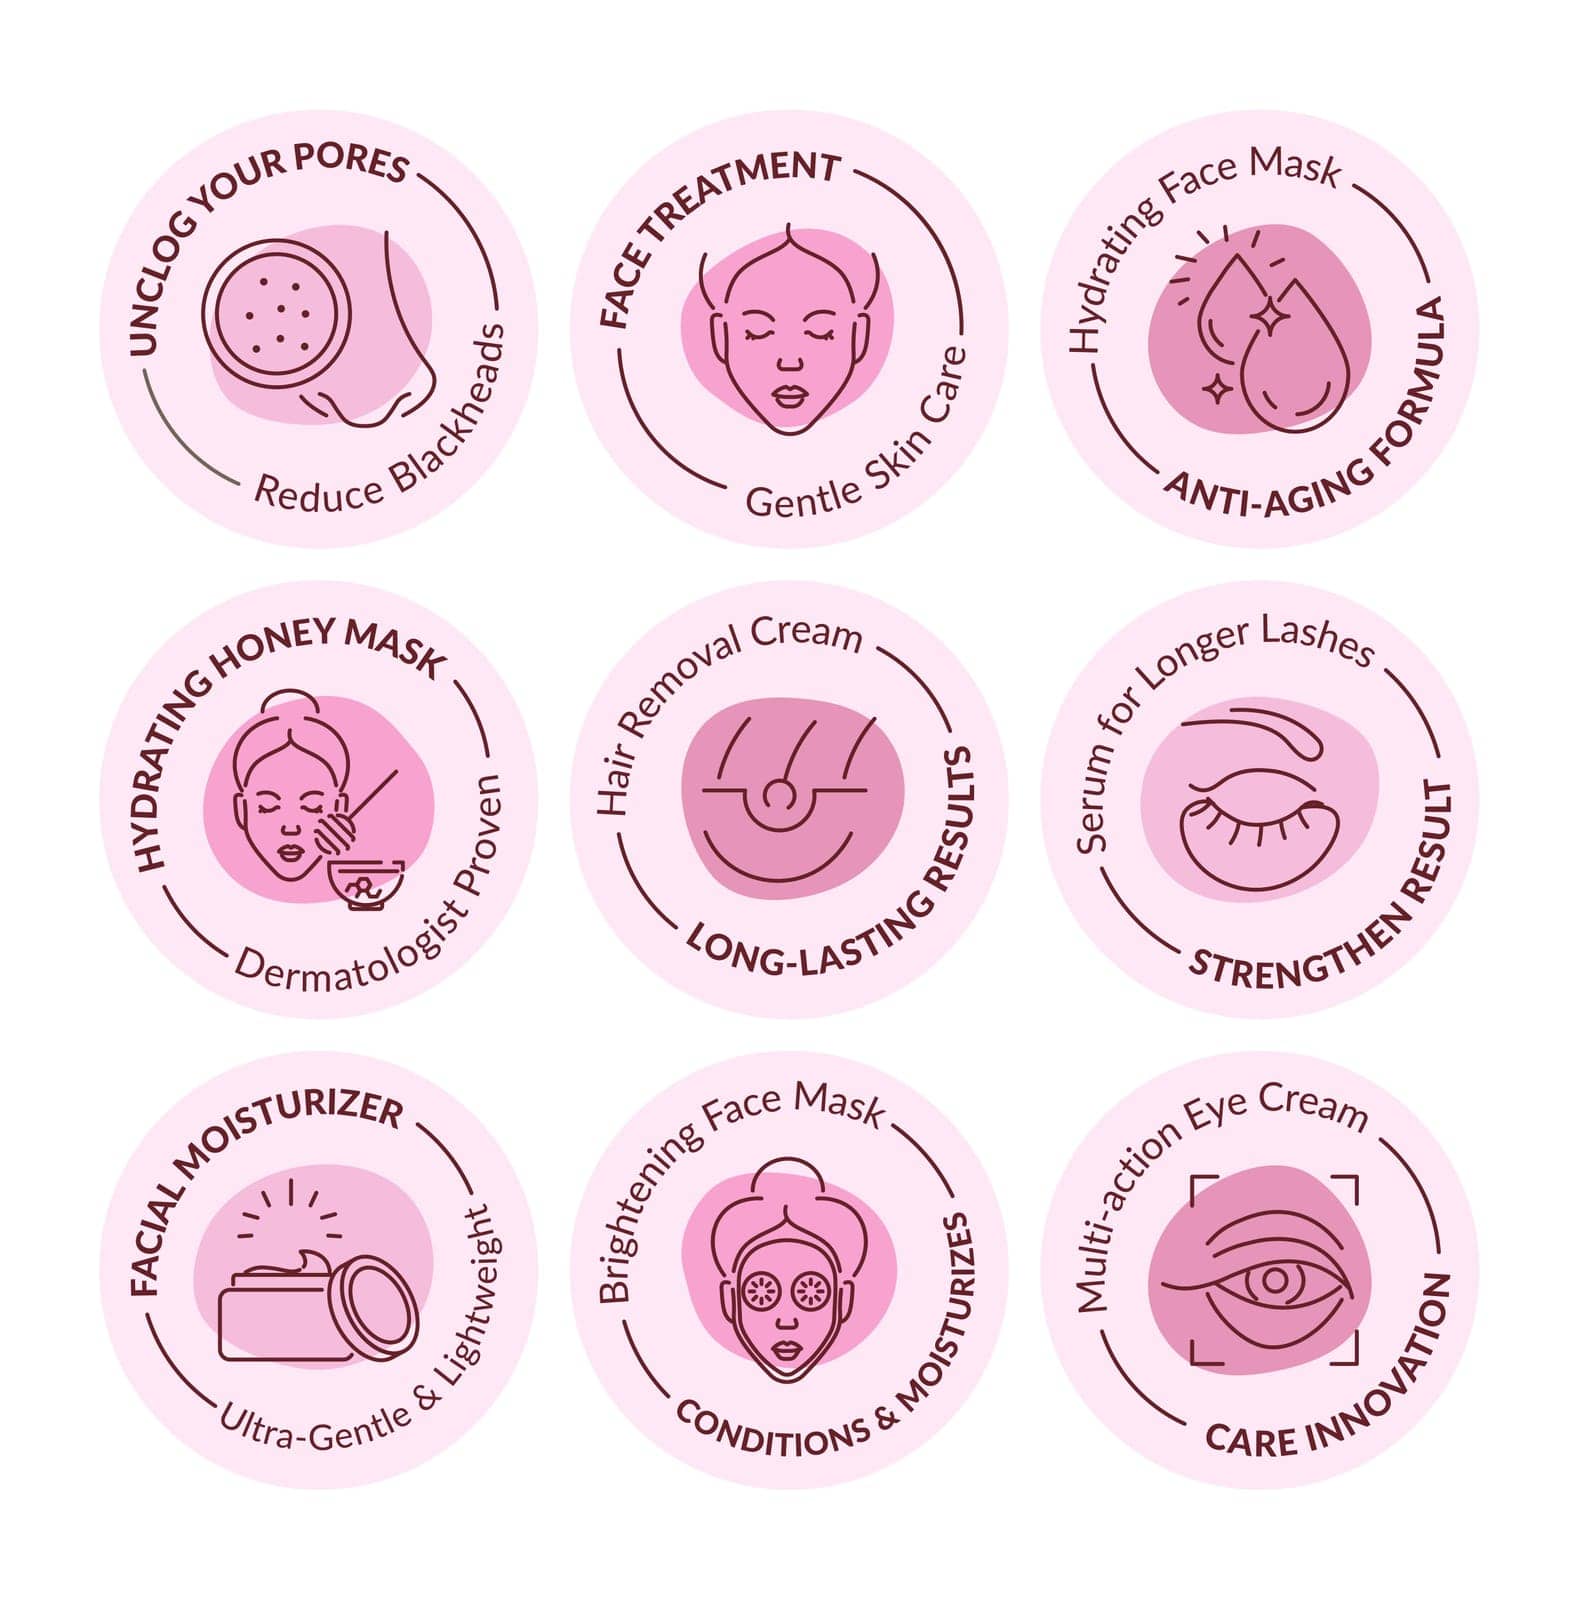 Sticker design set for skin care products by Sonulkaster